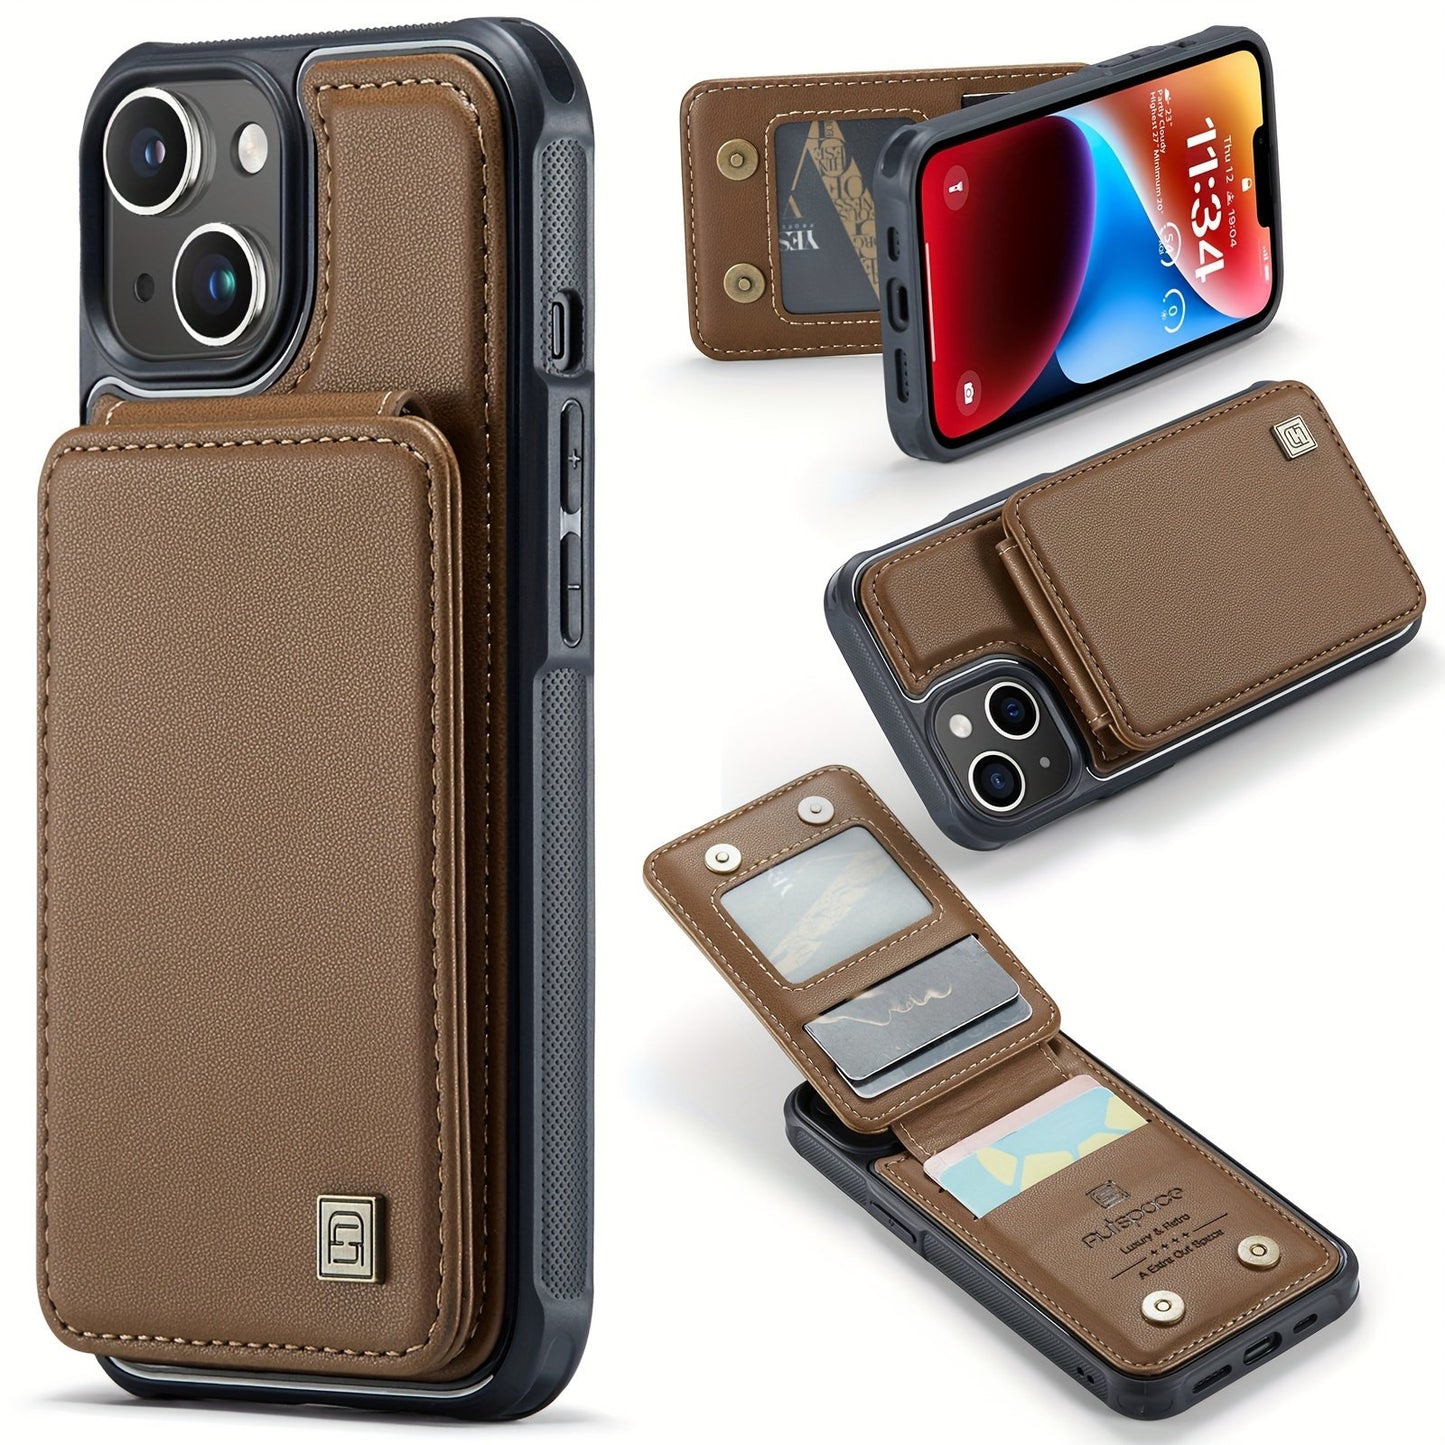 Multifunctional Card Holder And Mobile Phone Case For IPhone 14promax Card Wallet Apple 12mini Adds Anti-theft Compartment IPhone11pro Can Absorb Car Bracket Couple Mobile Phone Case Case